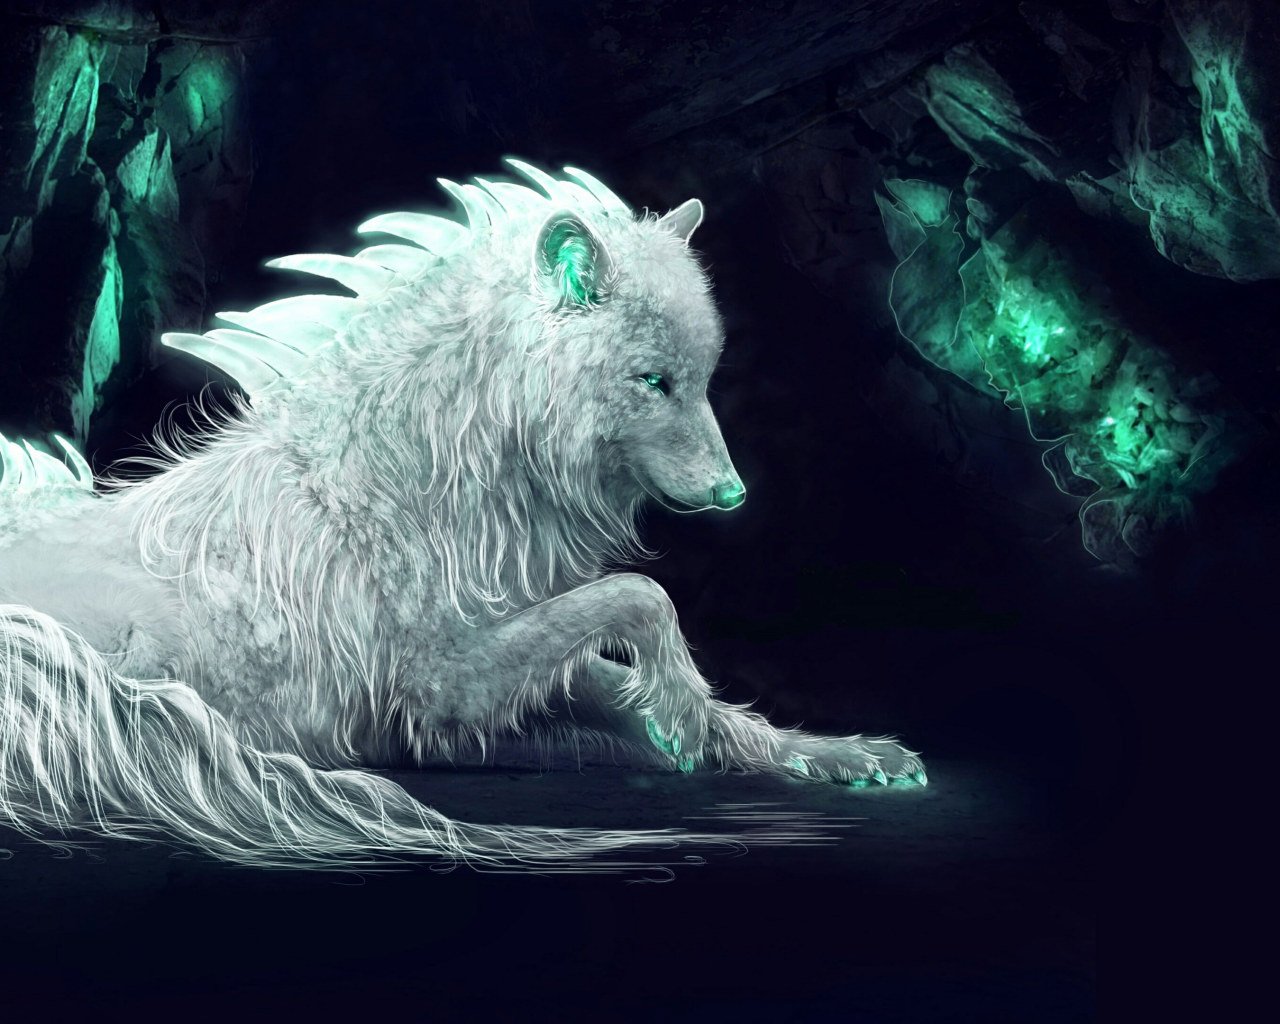 Darkness wallpaper, wolf, white wolf, fantasy art, imagination, mythical cr...